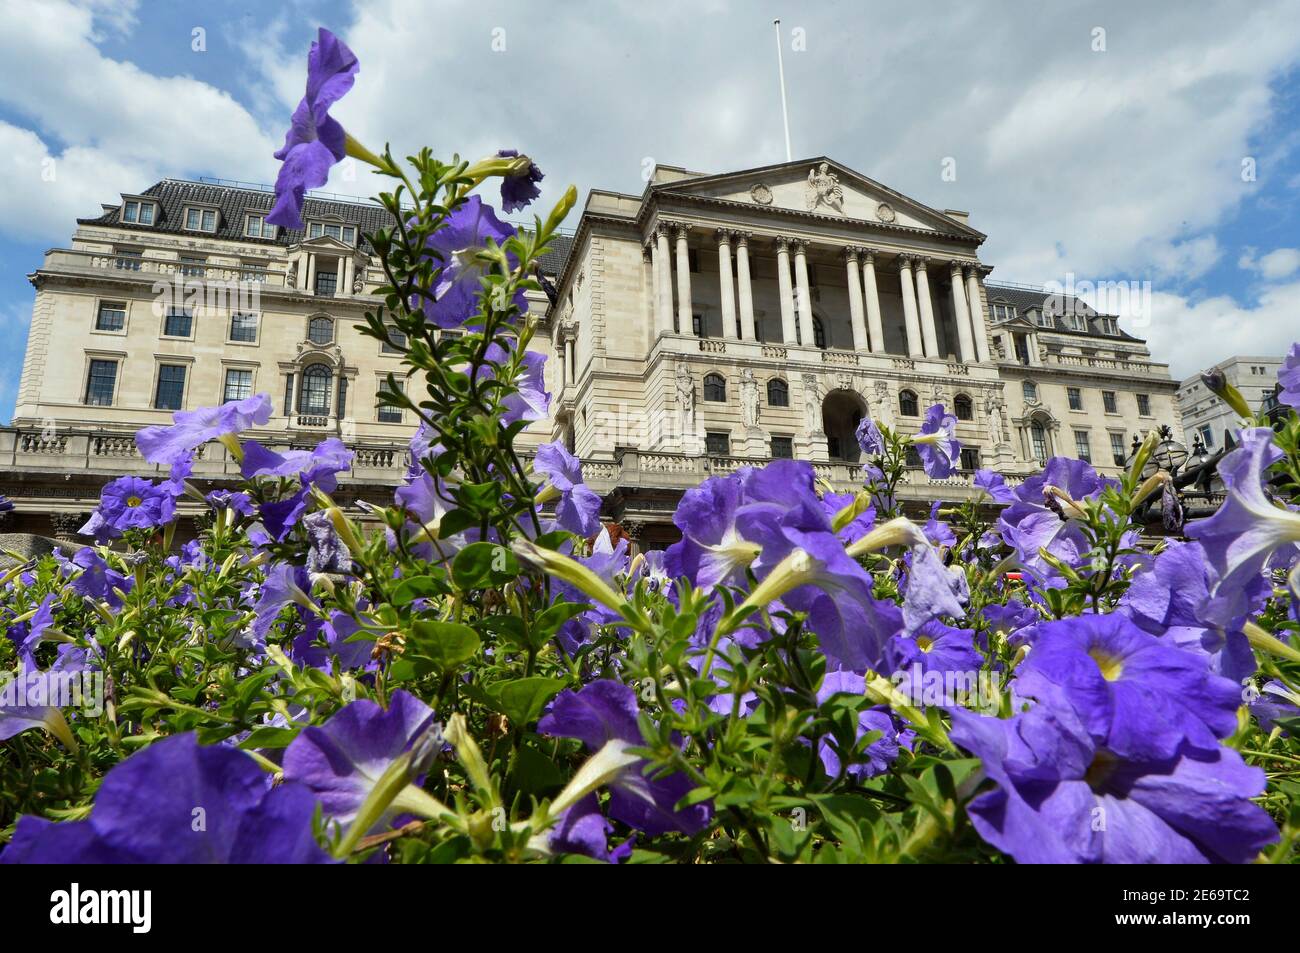 Flowers bloom in front of the Bank of England in the City of London August 6, 2013. British manufacturing grew much more strongly than expected in June, suggesting the country's recovery is broadening just as the Bank of England prepares to set out its plan for steering the economy back to health. Car sales also rose, house prices continued to climb and British retailers had their best month since 2006. REUTERS/Toby Melville (BRITAIN - Tags: BUSINESS) Stock Photo